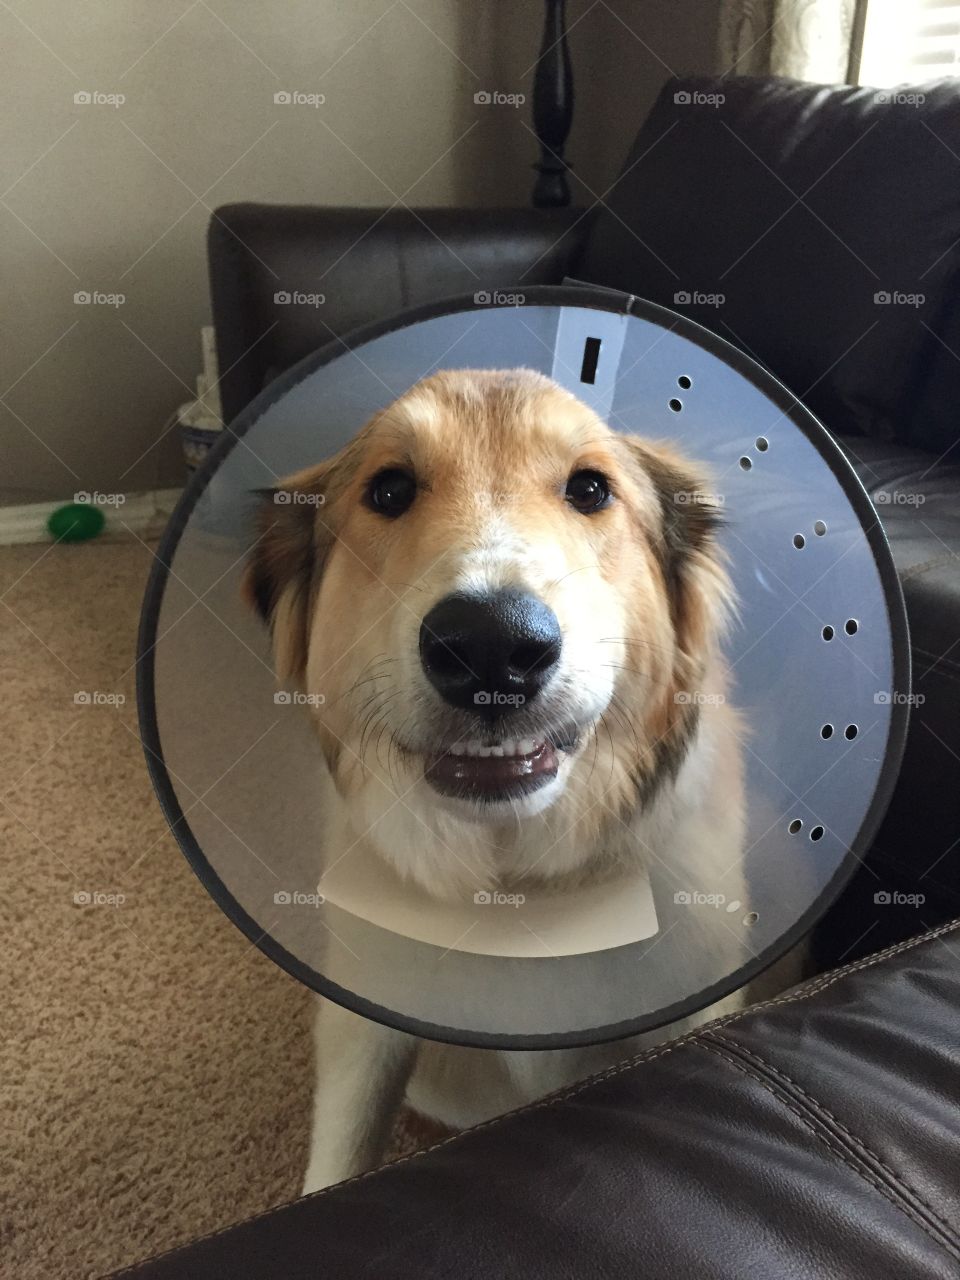 Paisley did not like her cone very well, but somehow I managed to get a little smile from her.